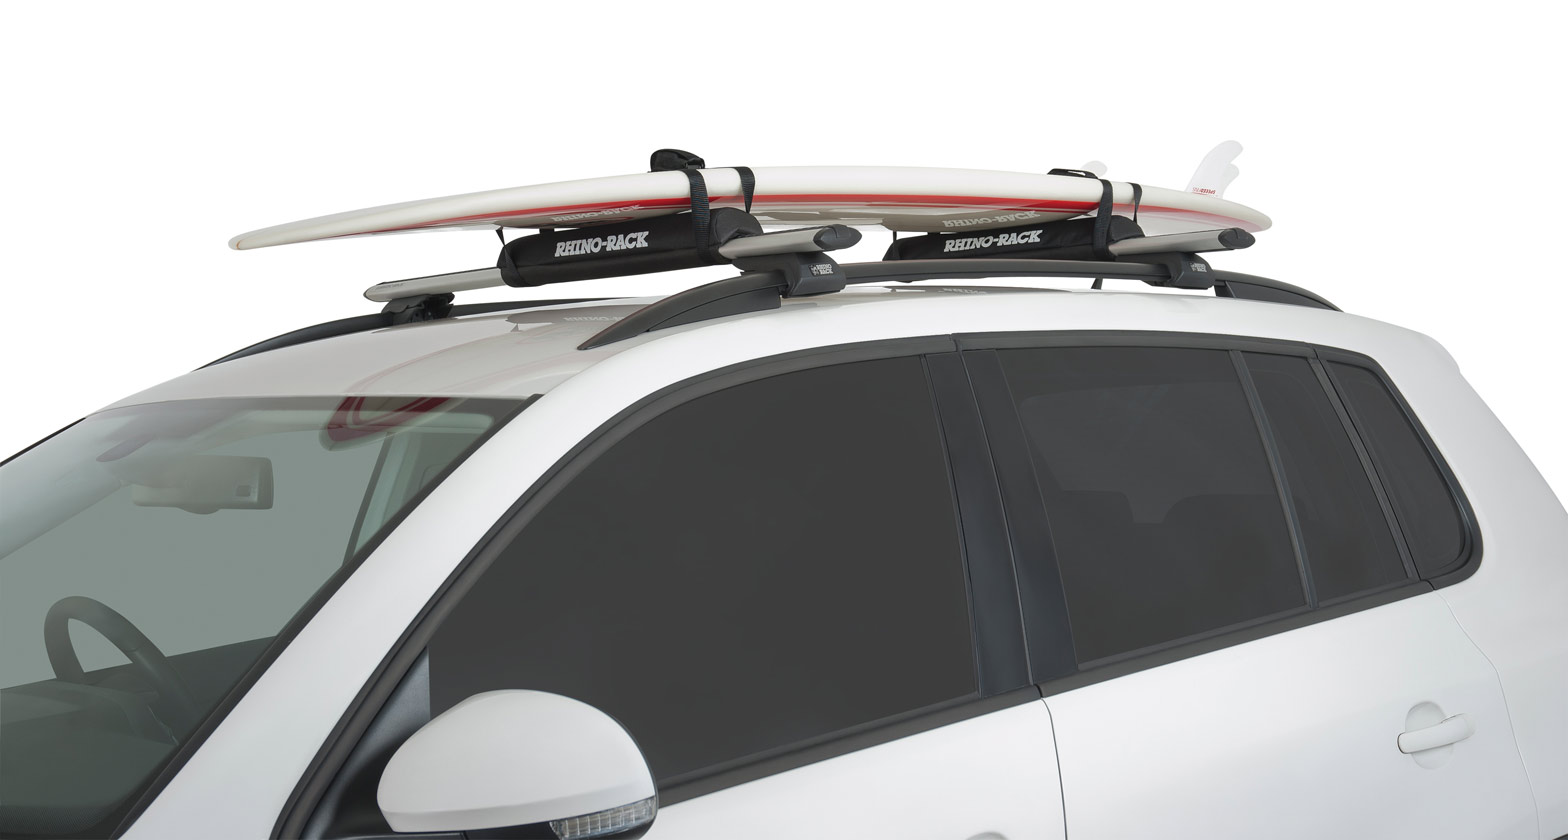 Aerial Material surfboard Tie Down Straps 3M Brand new Surf Surfing roof rack